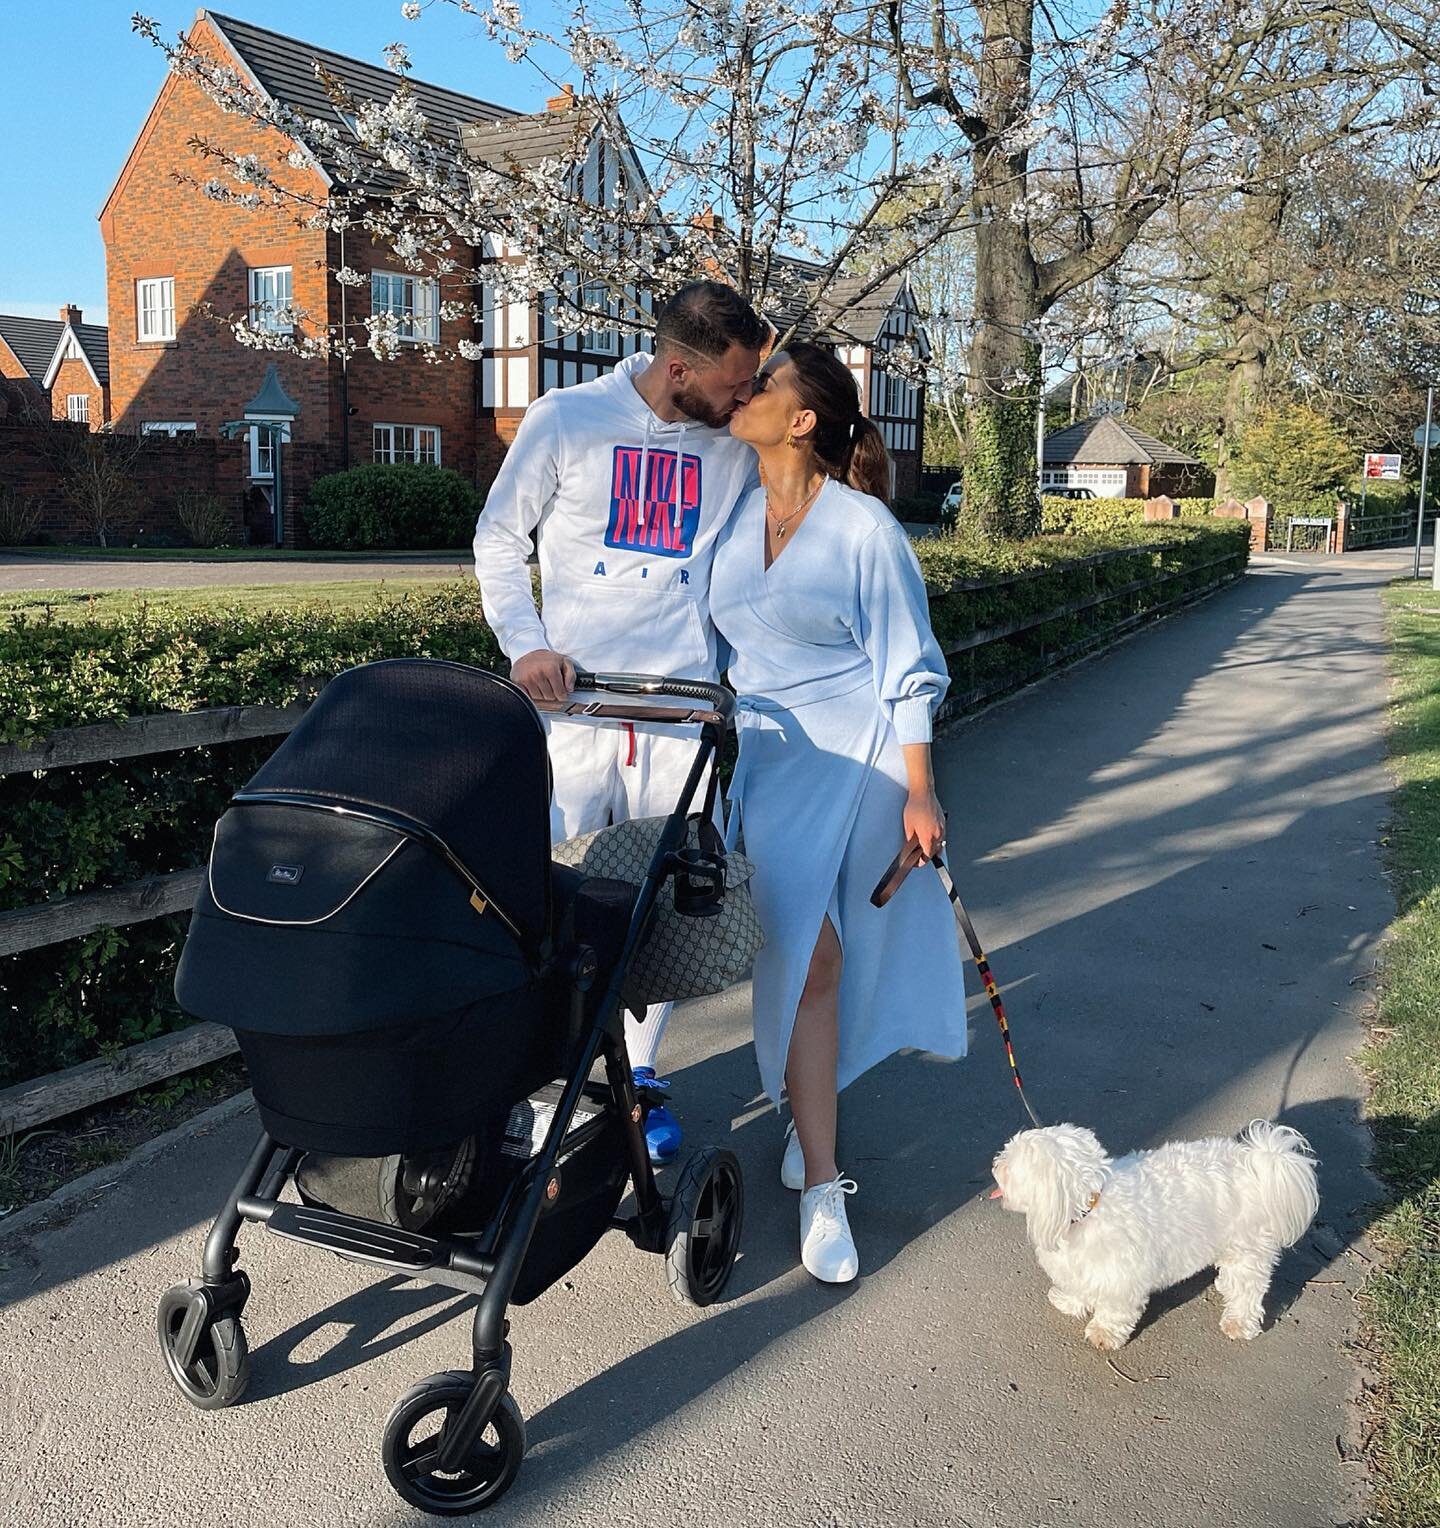 After weeks I finally felt ready to go for a walk with our little princess and we&rsquo;ve enjoyed every second @erikpieters3 💗 My beautiful pram is from @silvercrossuk 😍#firstfamilywalk